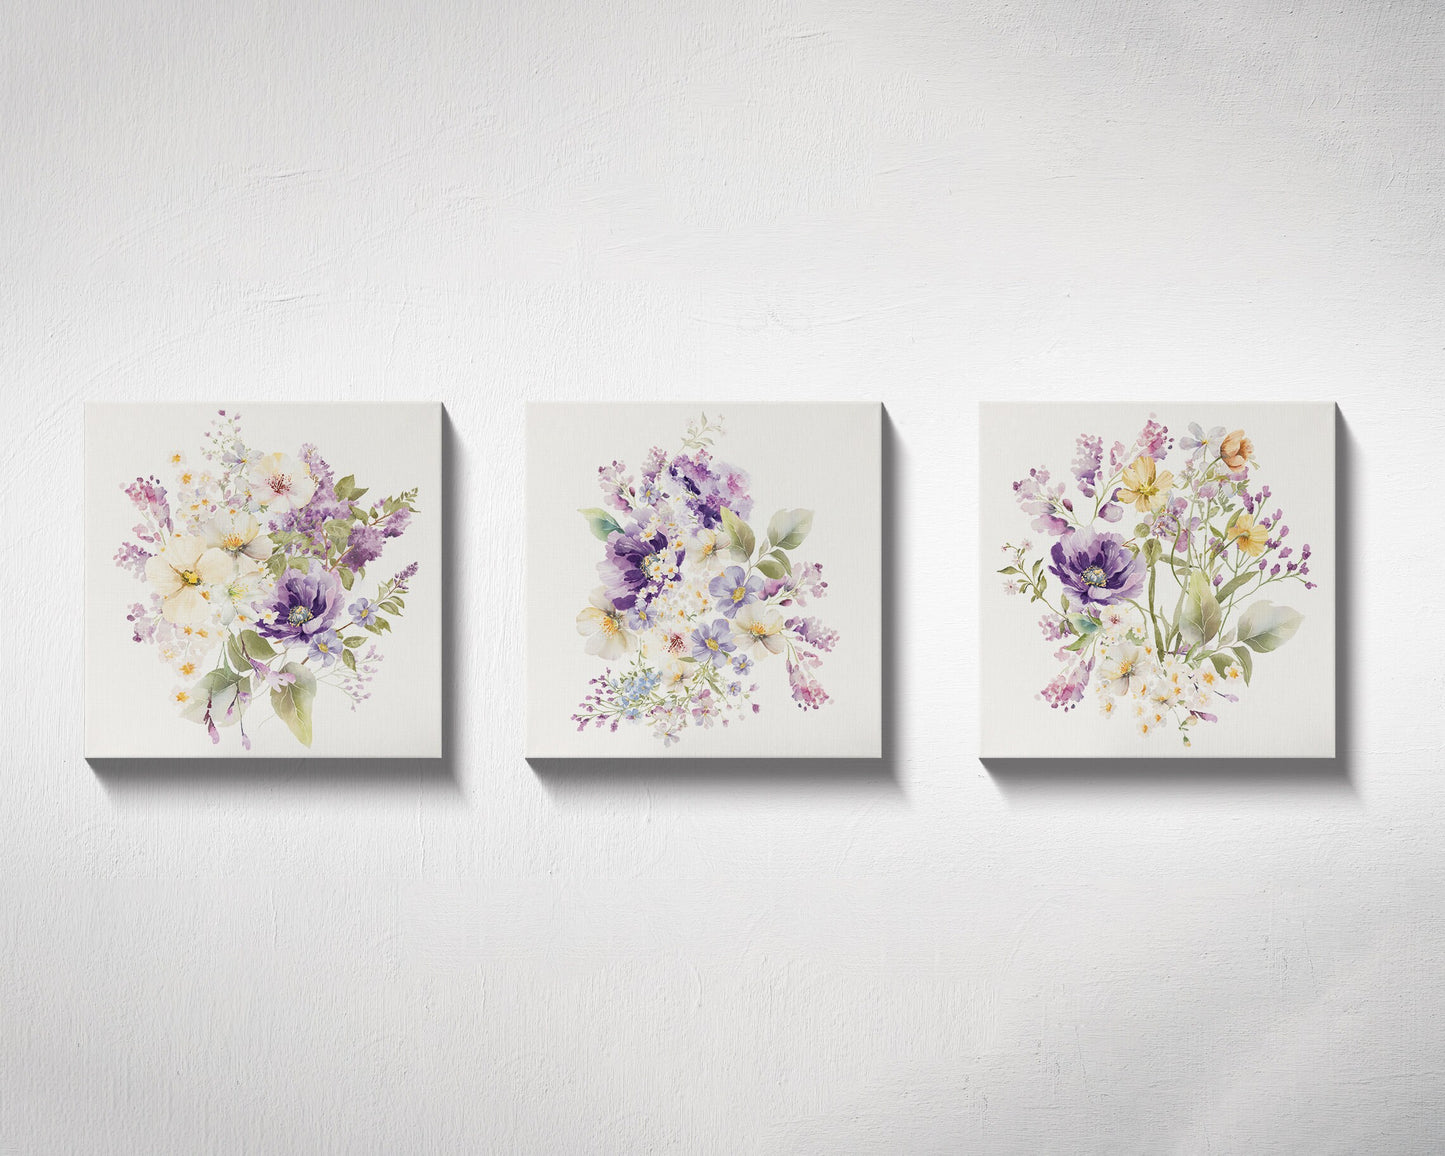 12in Spring Floral Paint Set of 3 - Watercolor Spring Flowers, Purple Watercolor Flowers Paint Wall Art